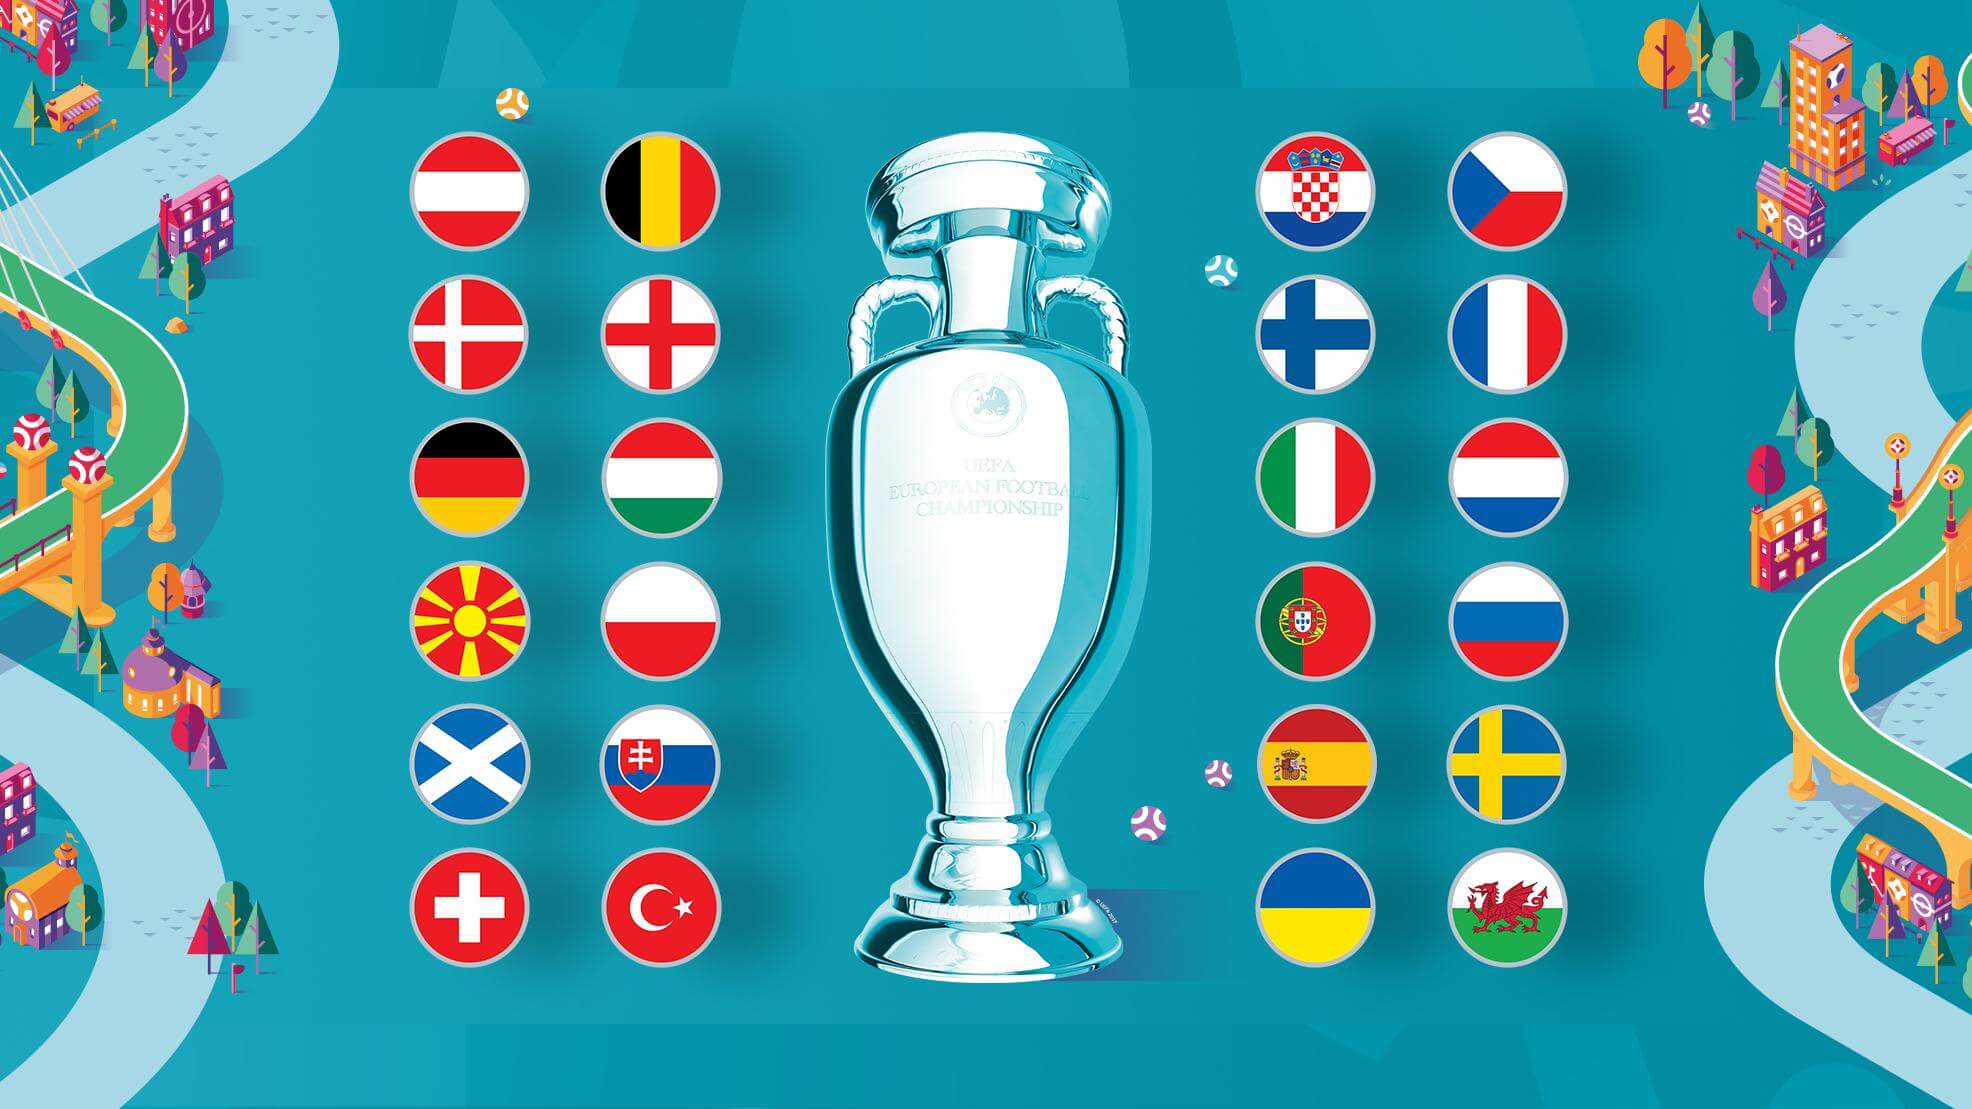 A quick review of Euro 2020 – The big event we missed for a long time (due to the Covid pandemic)